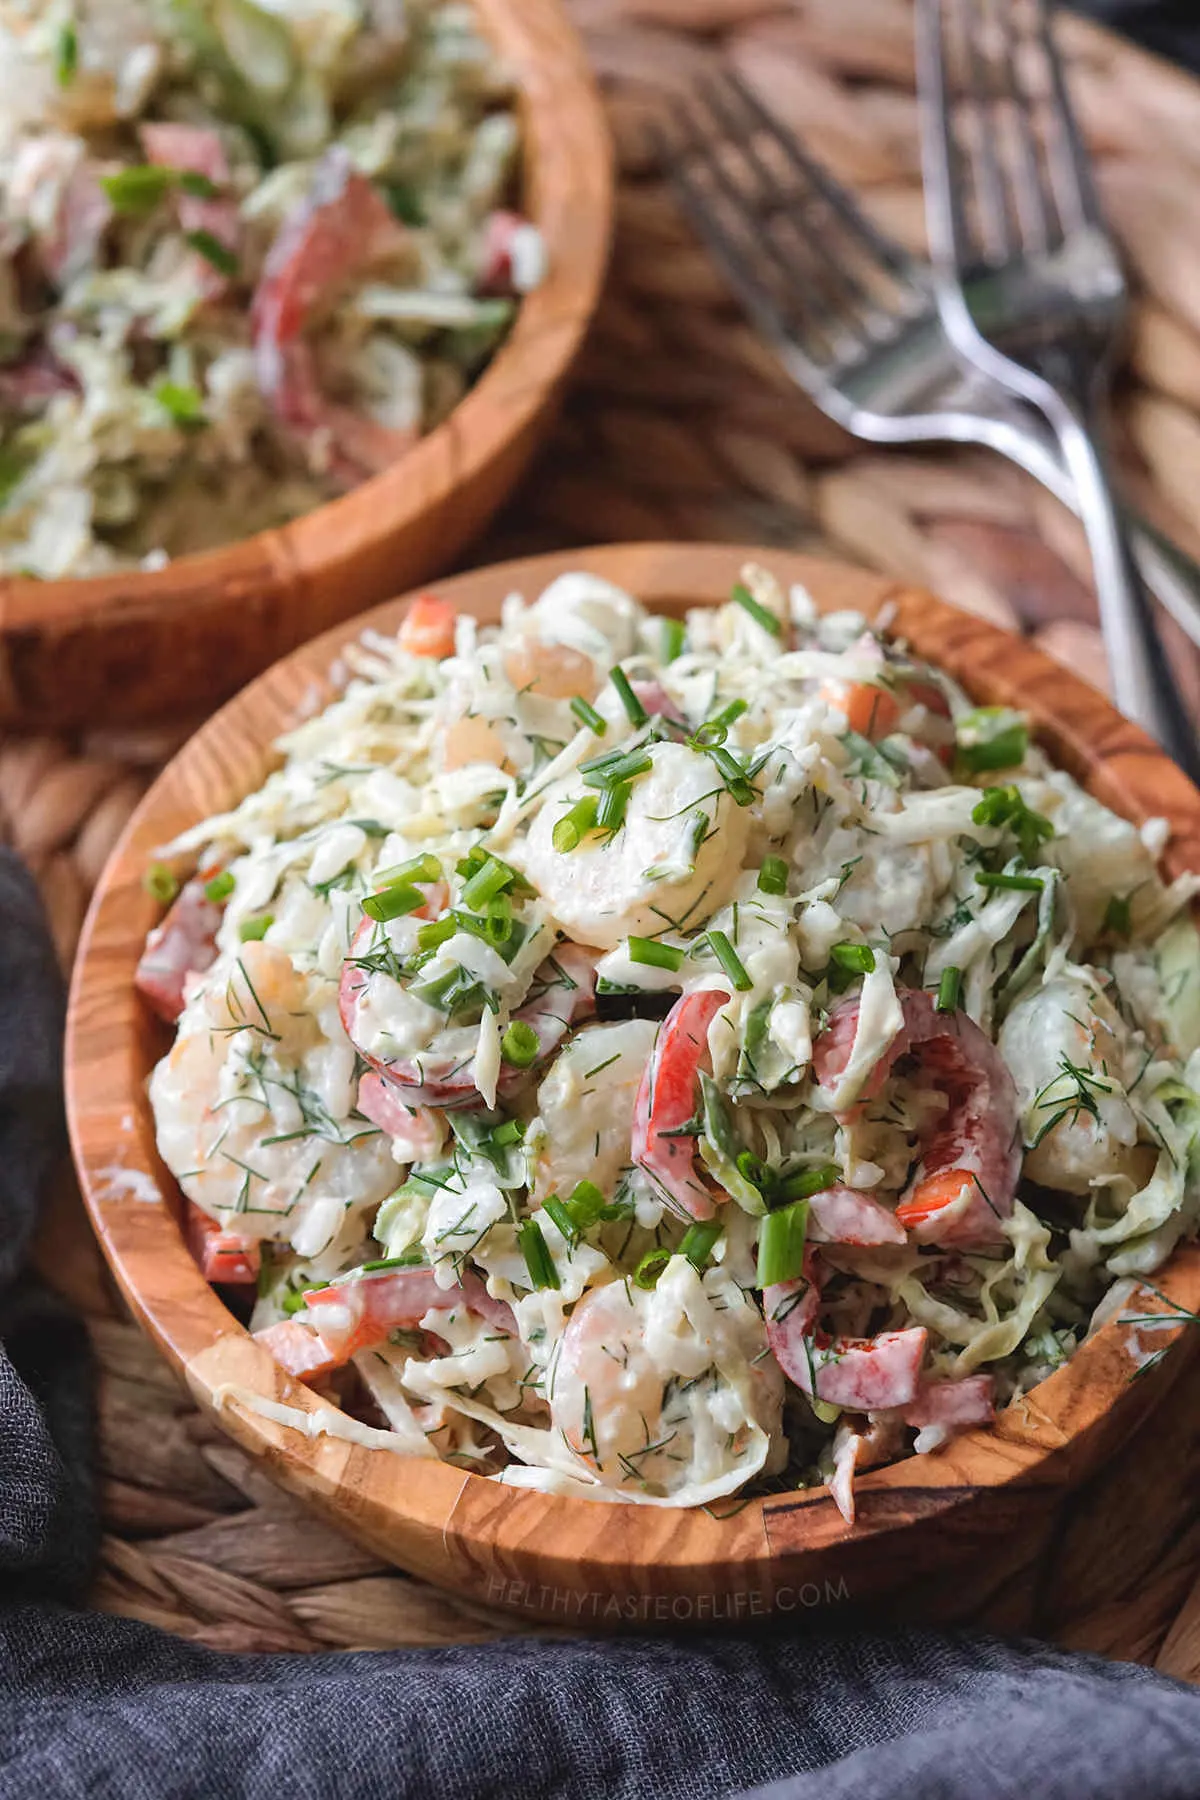 Shrimp and cabbage salad served in a wooden bowl.